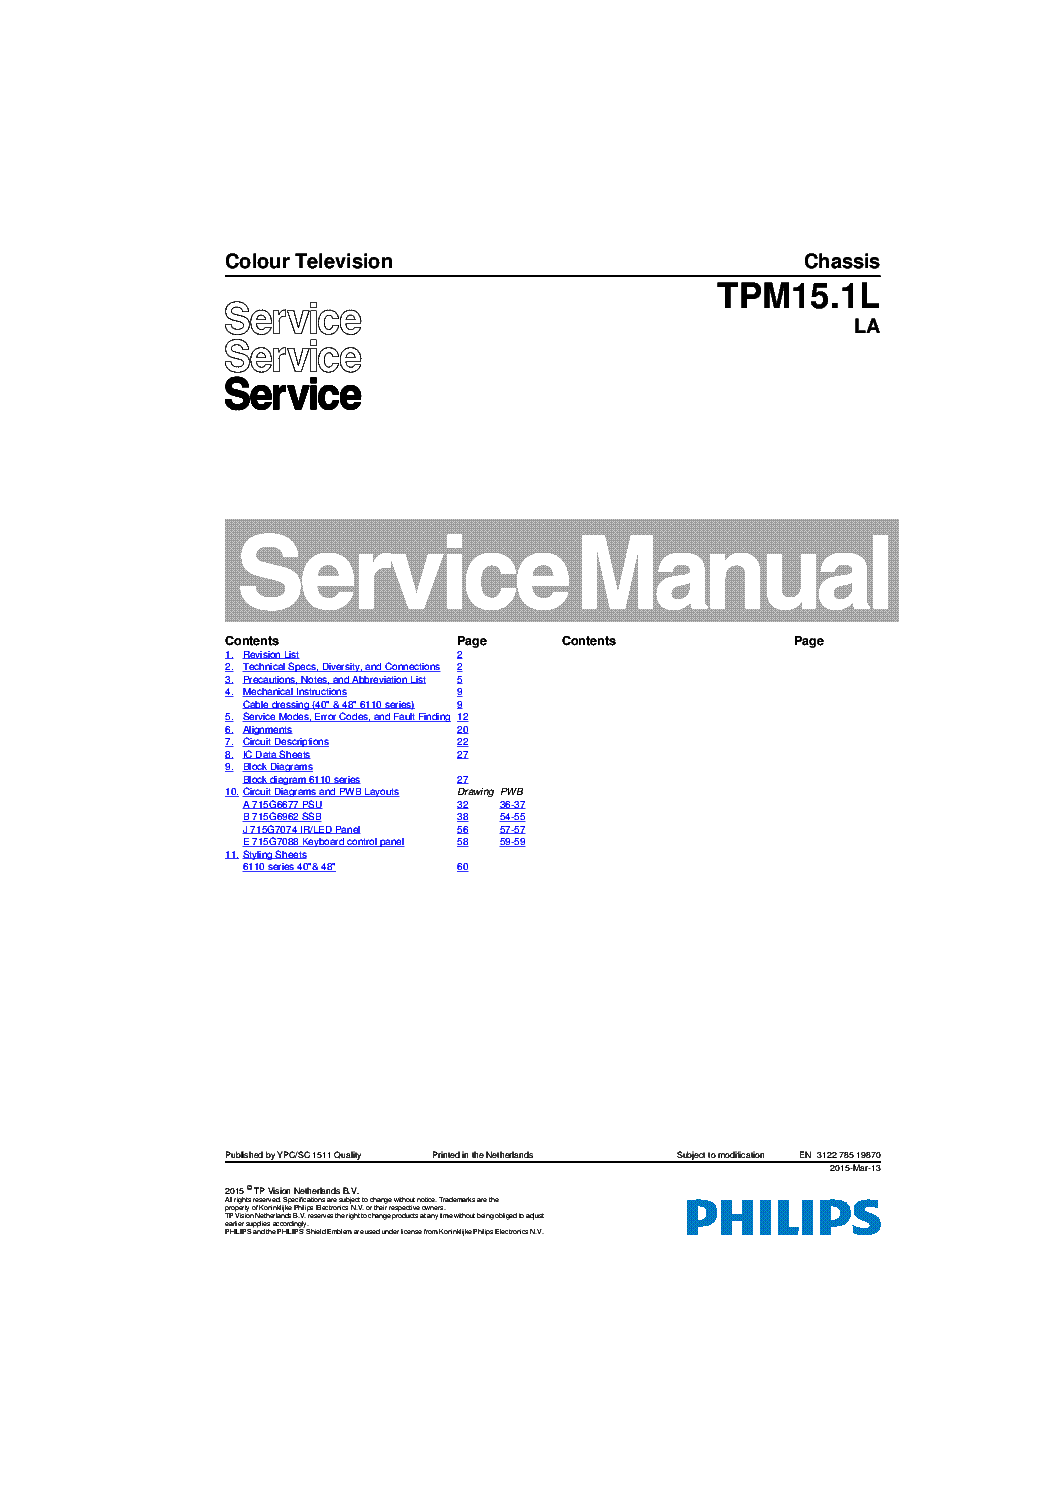 PHILIPS TPM15.1LLA 312278519870 150313 service manual (1st page)